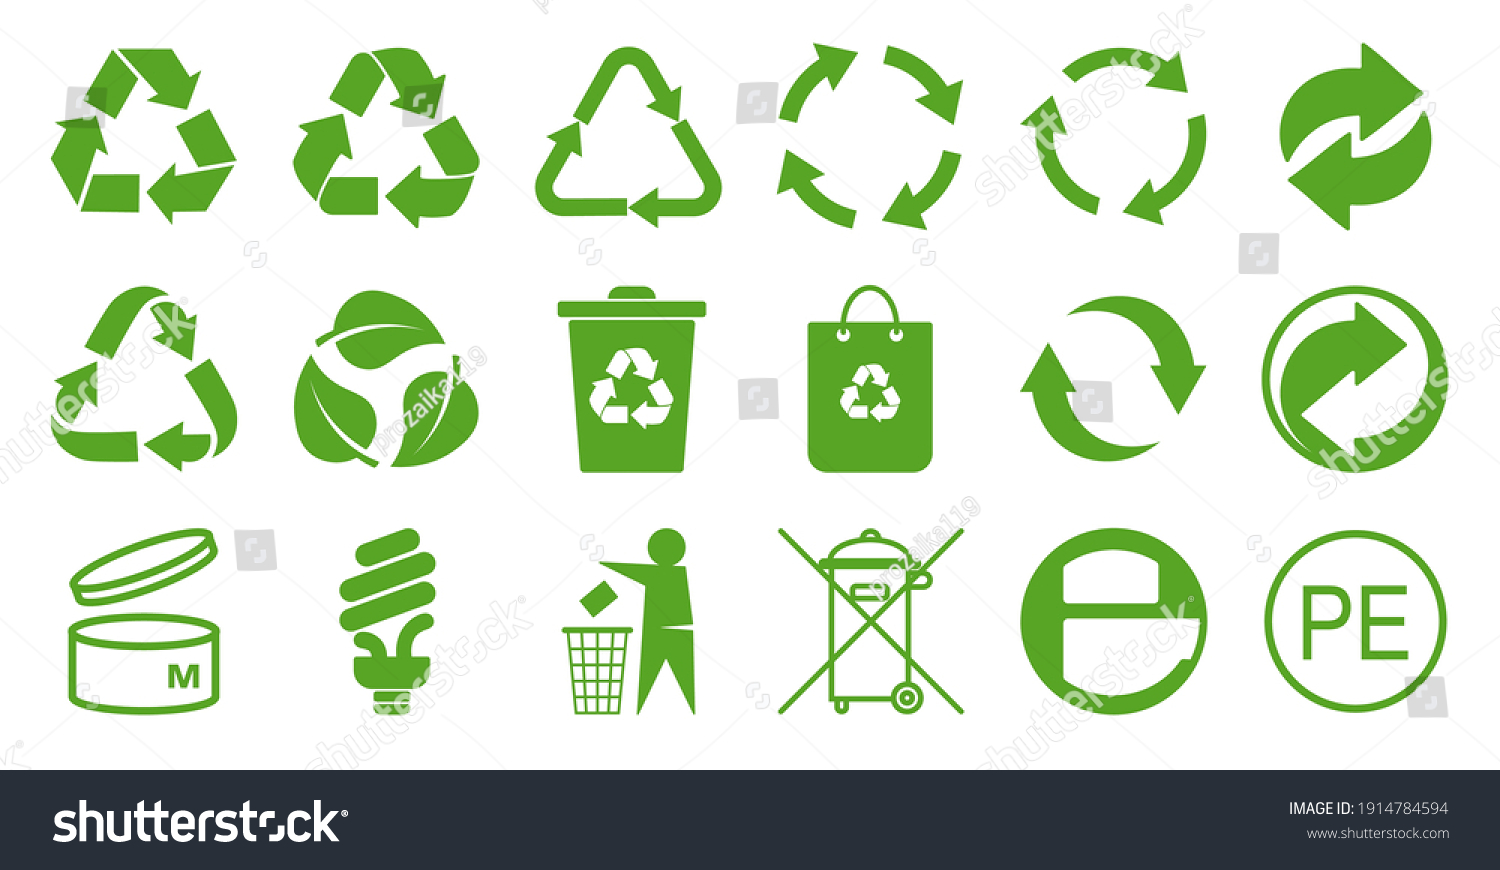 Set of symbols and signs for design of packaging products, information about the goods being transported and a sign of recycling, green symbols isolated on white background #1914784594